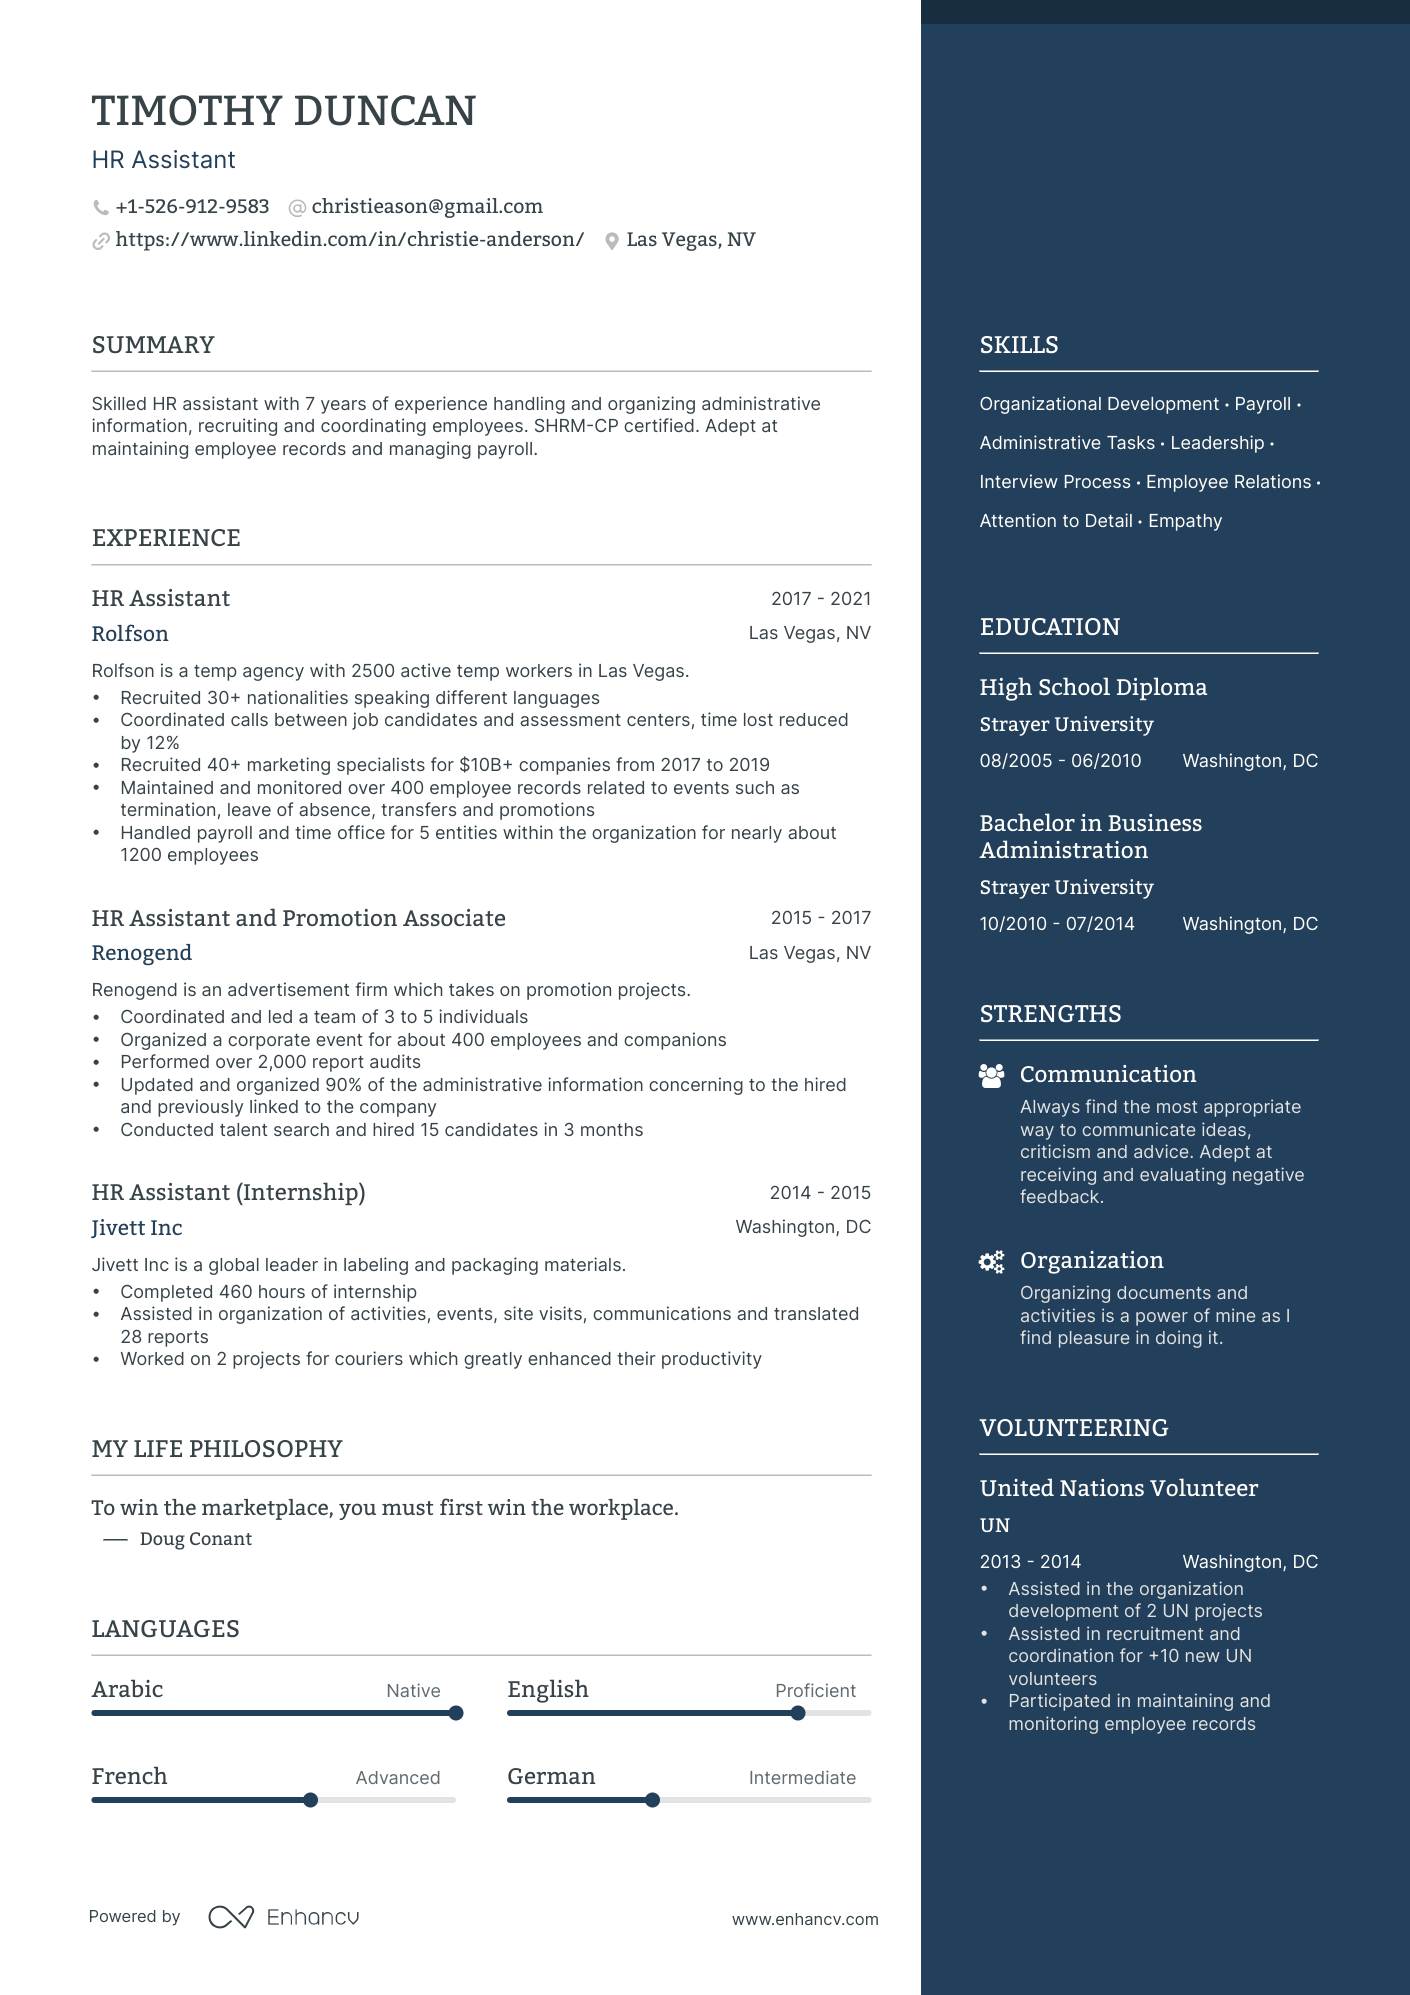 human resources assistant resume sample